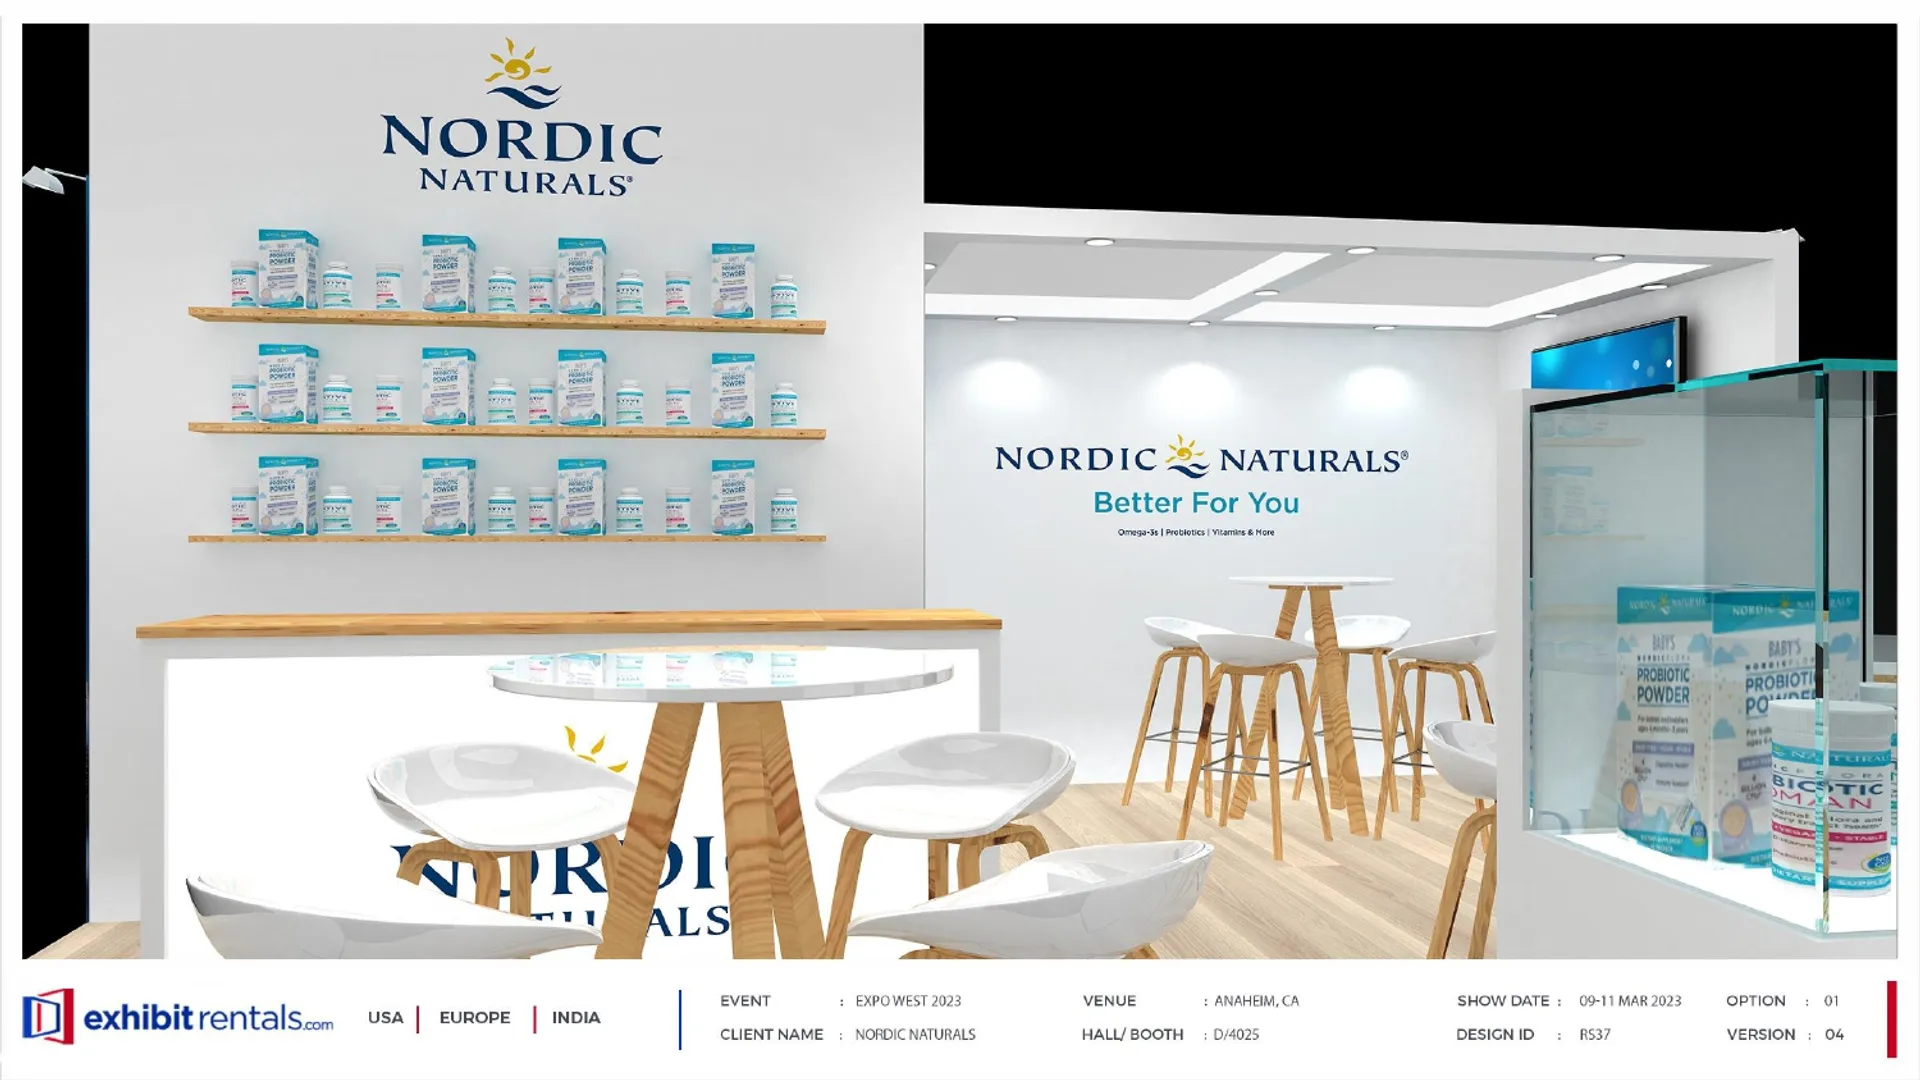 booth-design-projects/Exhibit-Rentals/2024-04-18-20x20-PENINSULA-Project-102/Nordic _naturals_expo_West_v1.6-20_page-0001-n3h11t.jpg